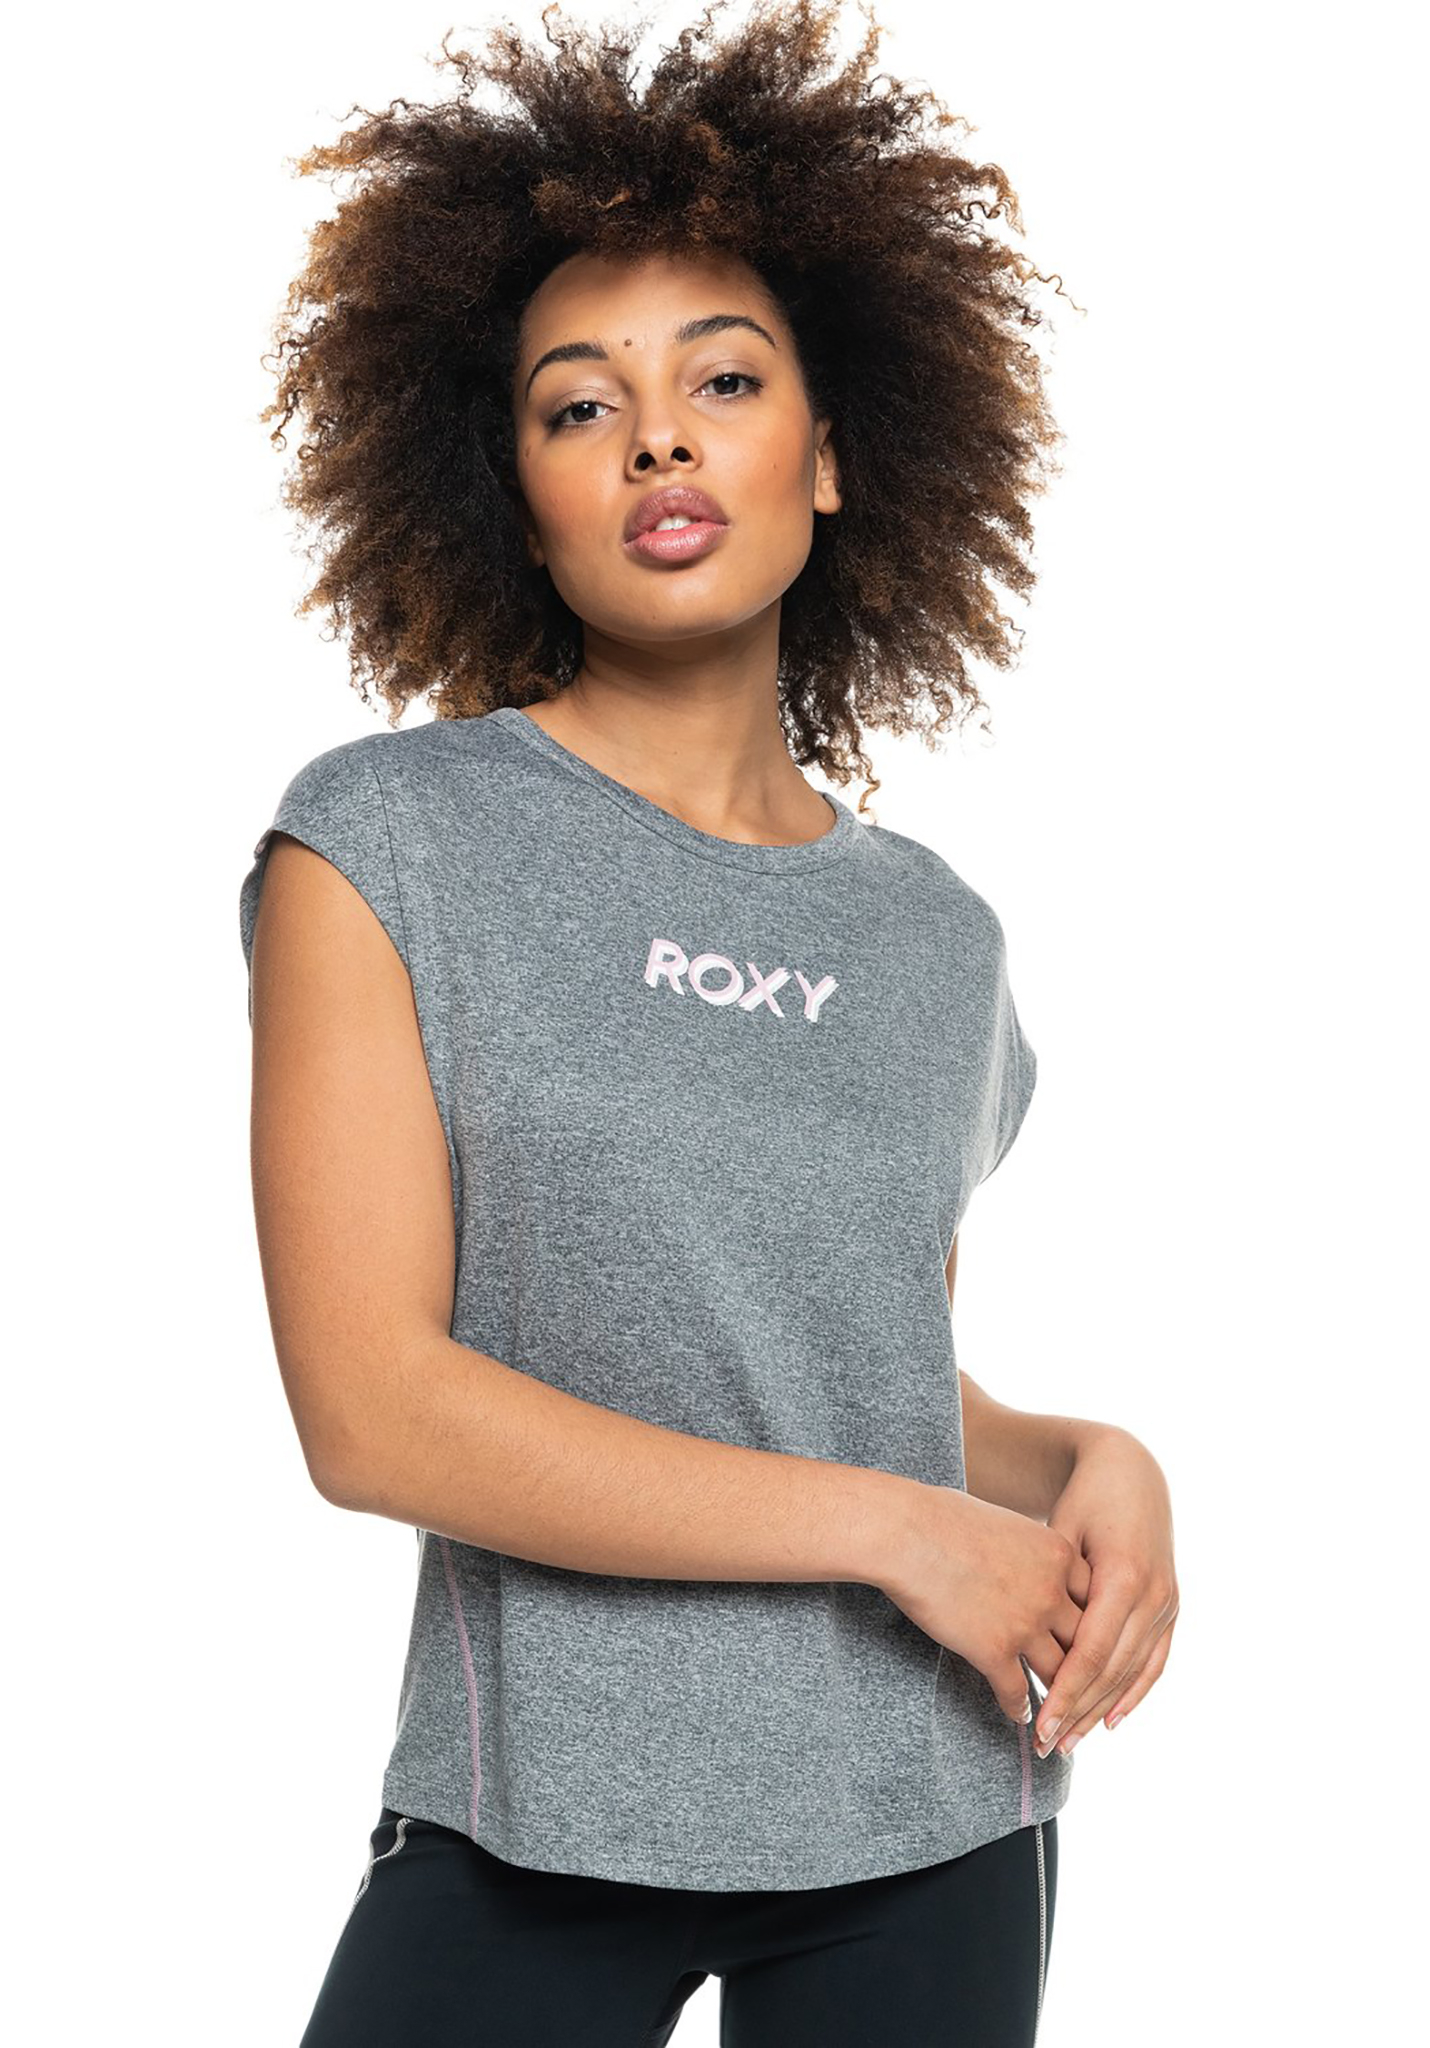 Roxy Training - Technical T-Shirt anthracite XL